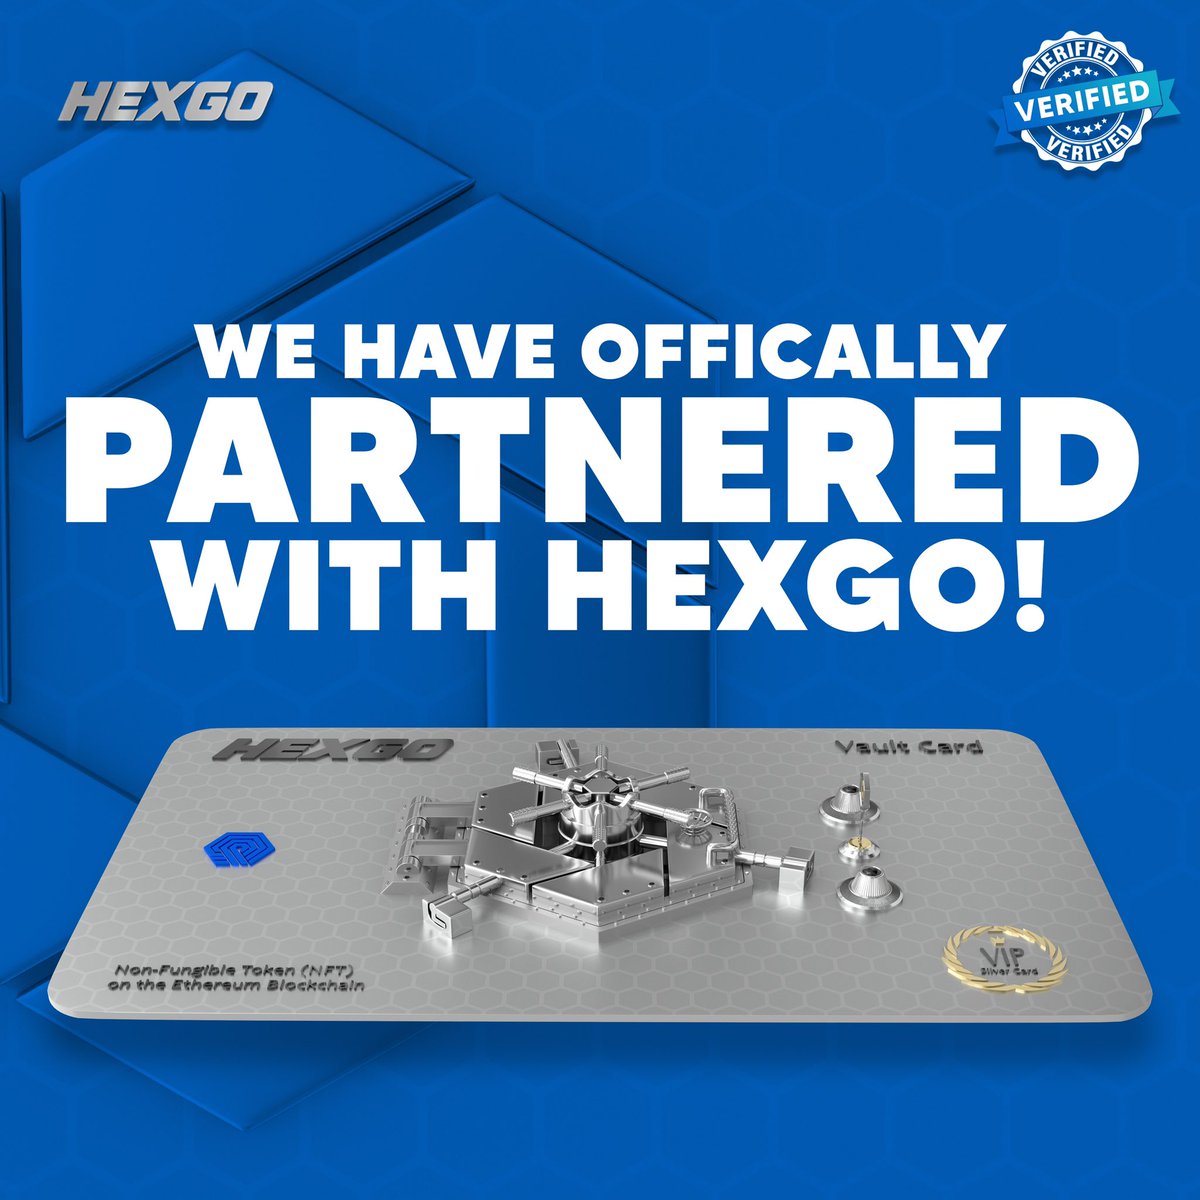 @LostEdenNFT has officially partnered with @HEXGO_NFT 1⃣ RT + Follow @HEXGO_NFT 2⃣ Join their discord early for an OG role! discord.gg/hexgo We will share the exciting details soon! 🔔Stay tuned for upcoming exclusive WL giveaways and free #NFTs for our community!